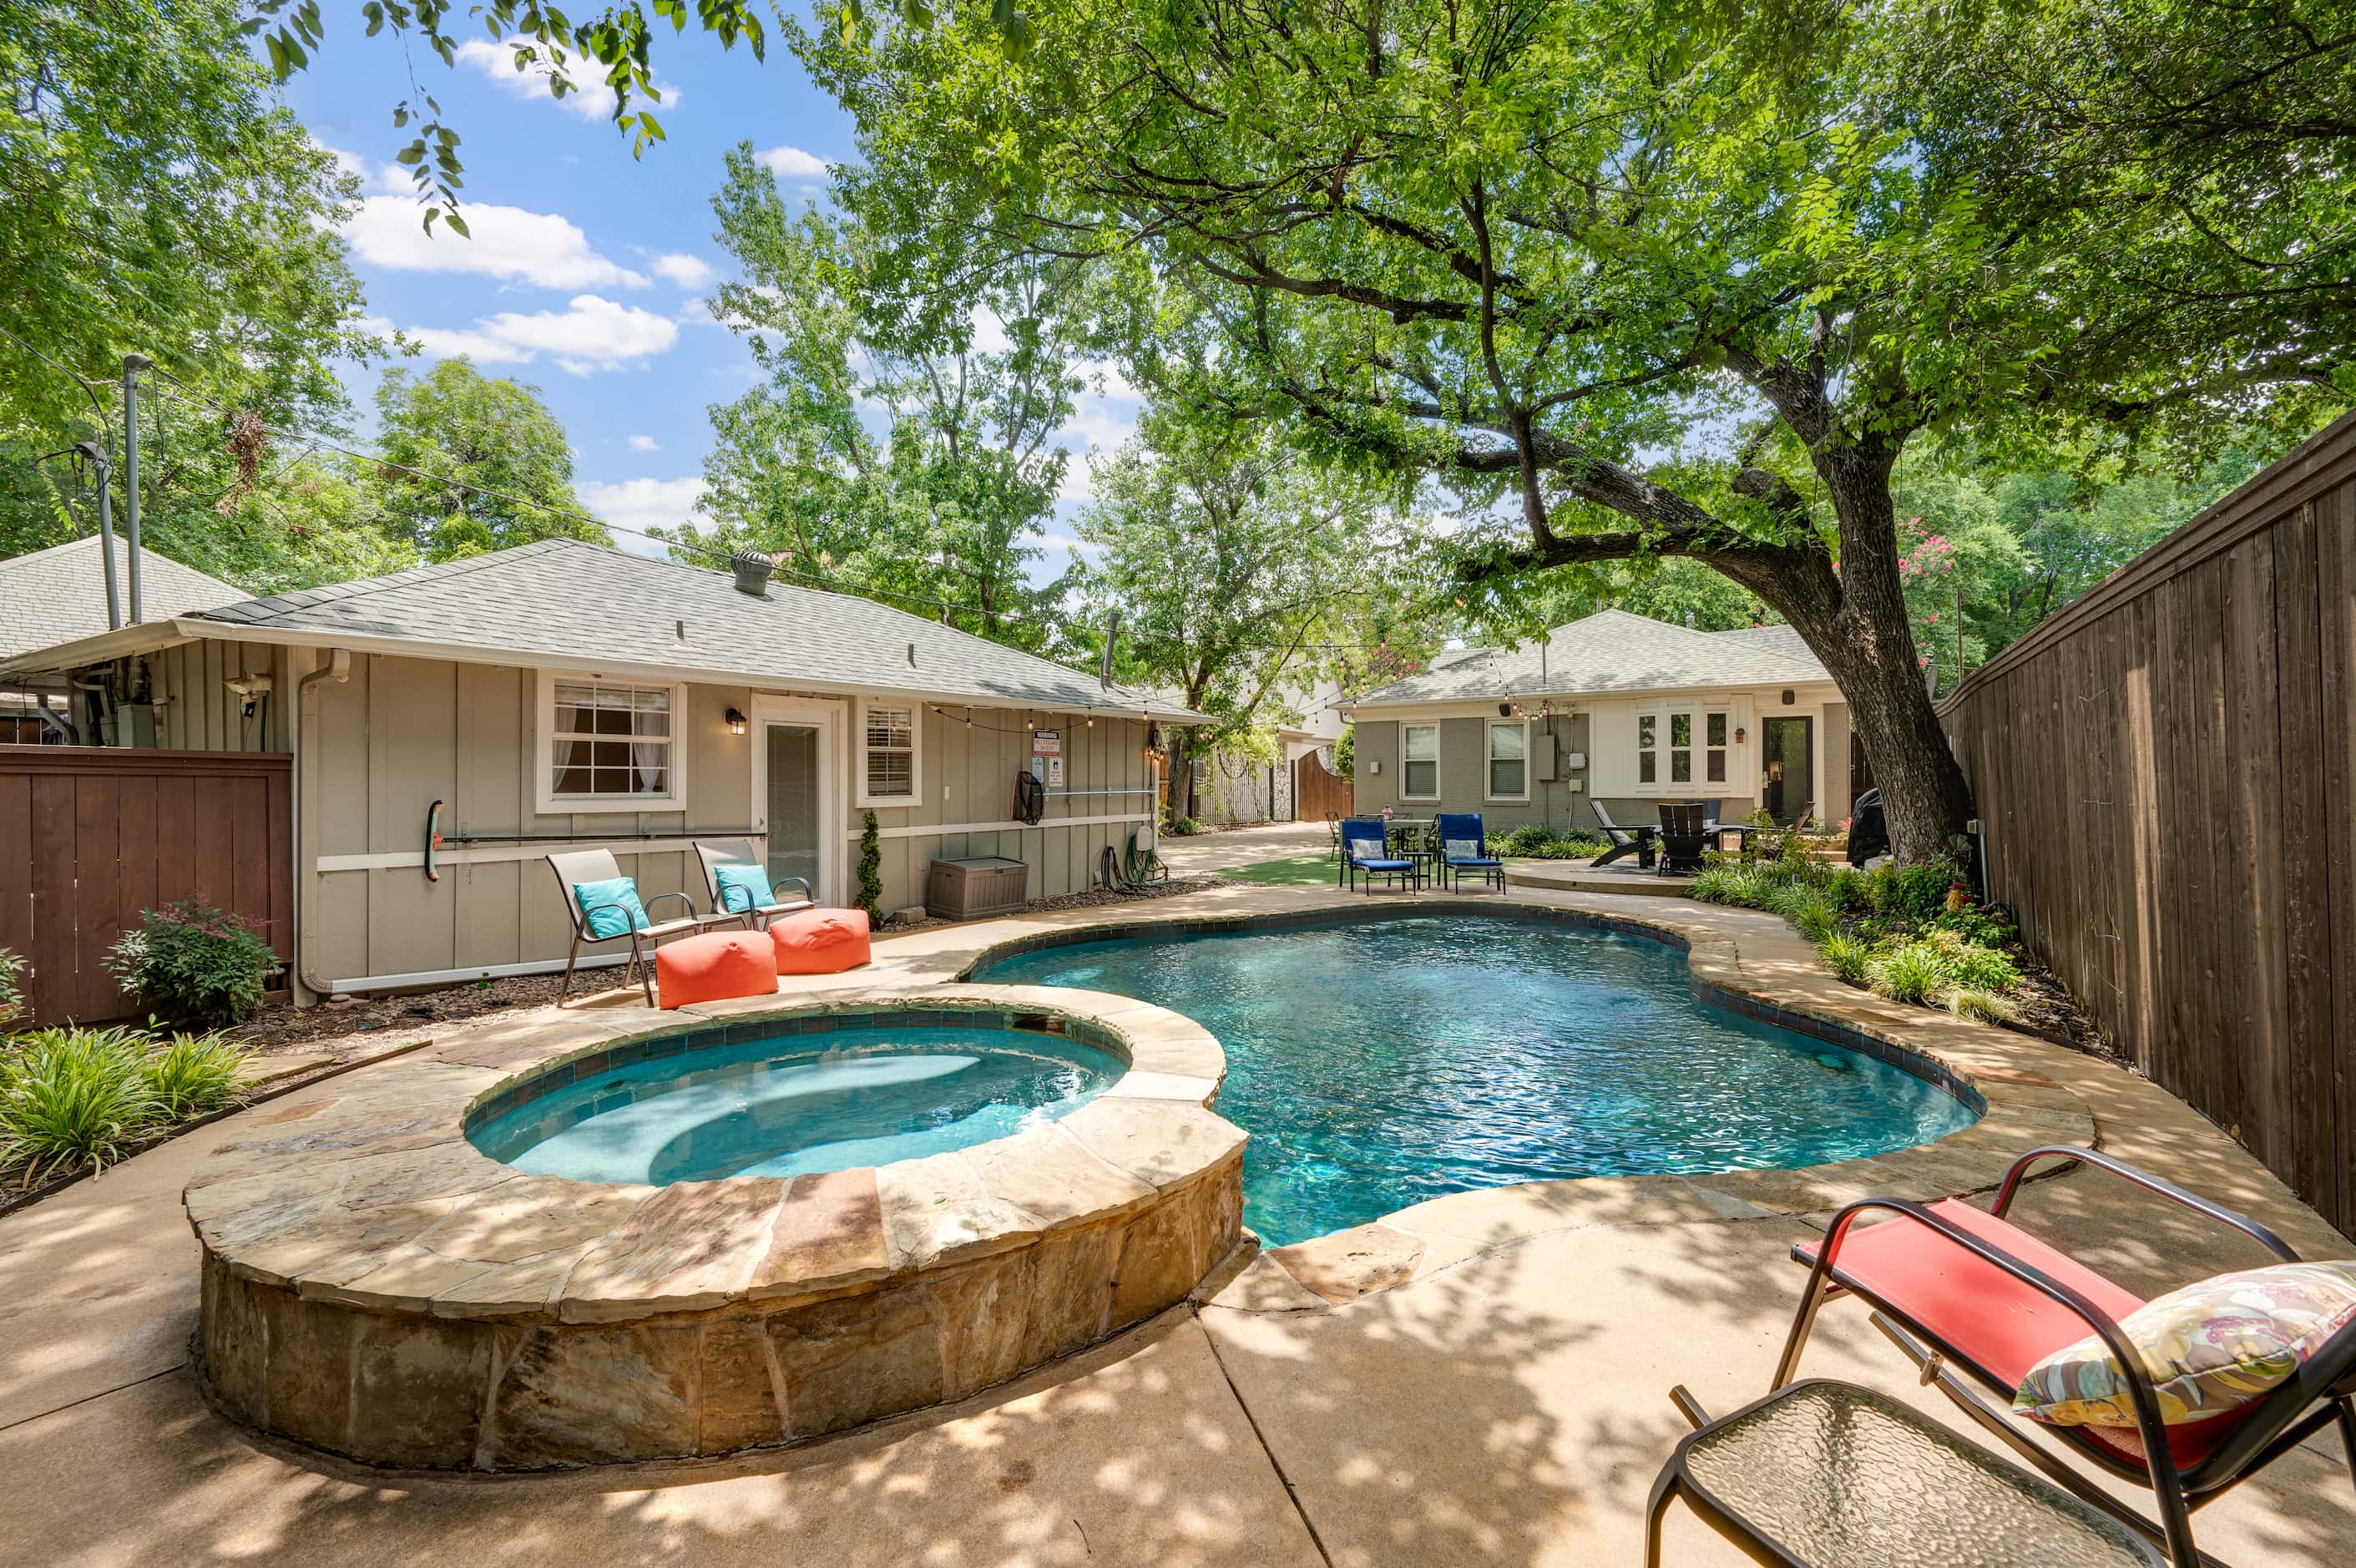 The shaded backyard pool is an ideal place to spend a late-summer day.